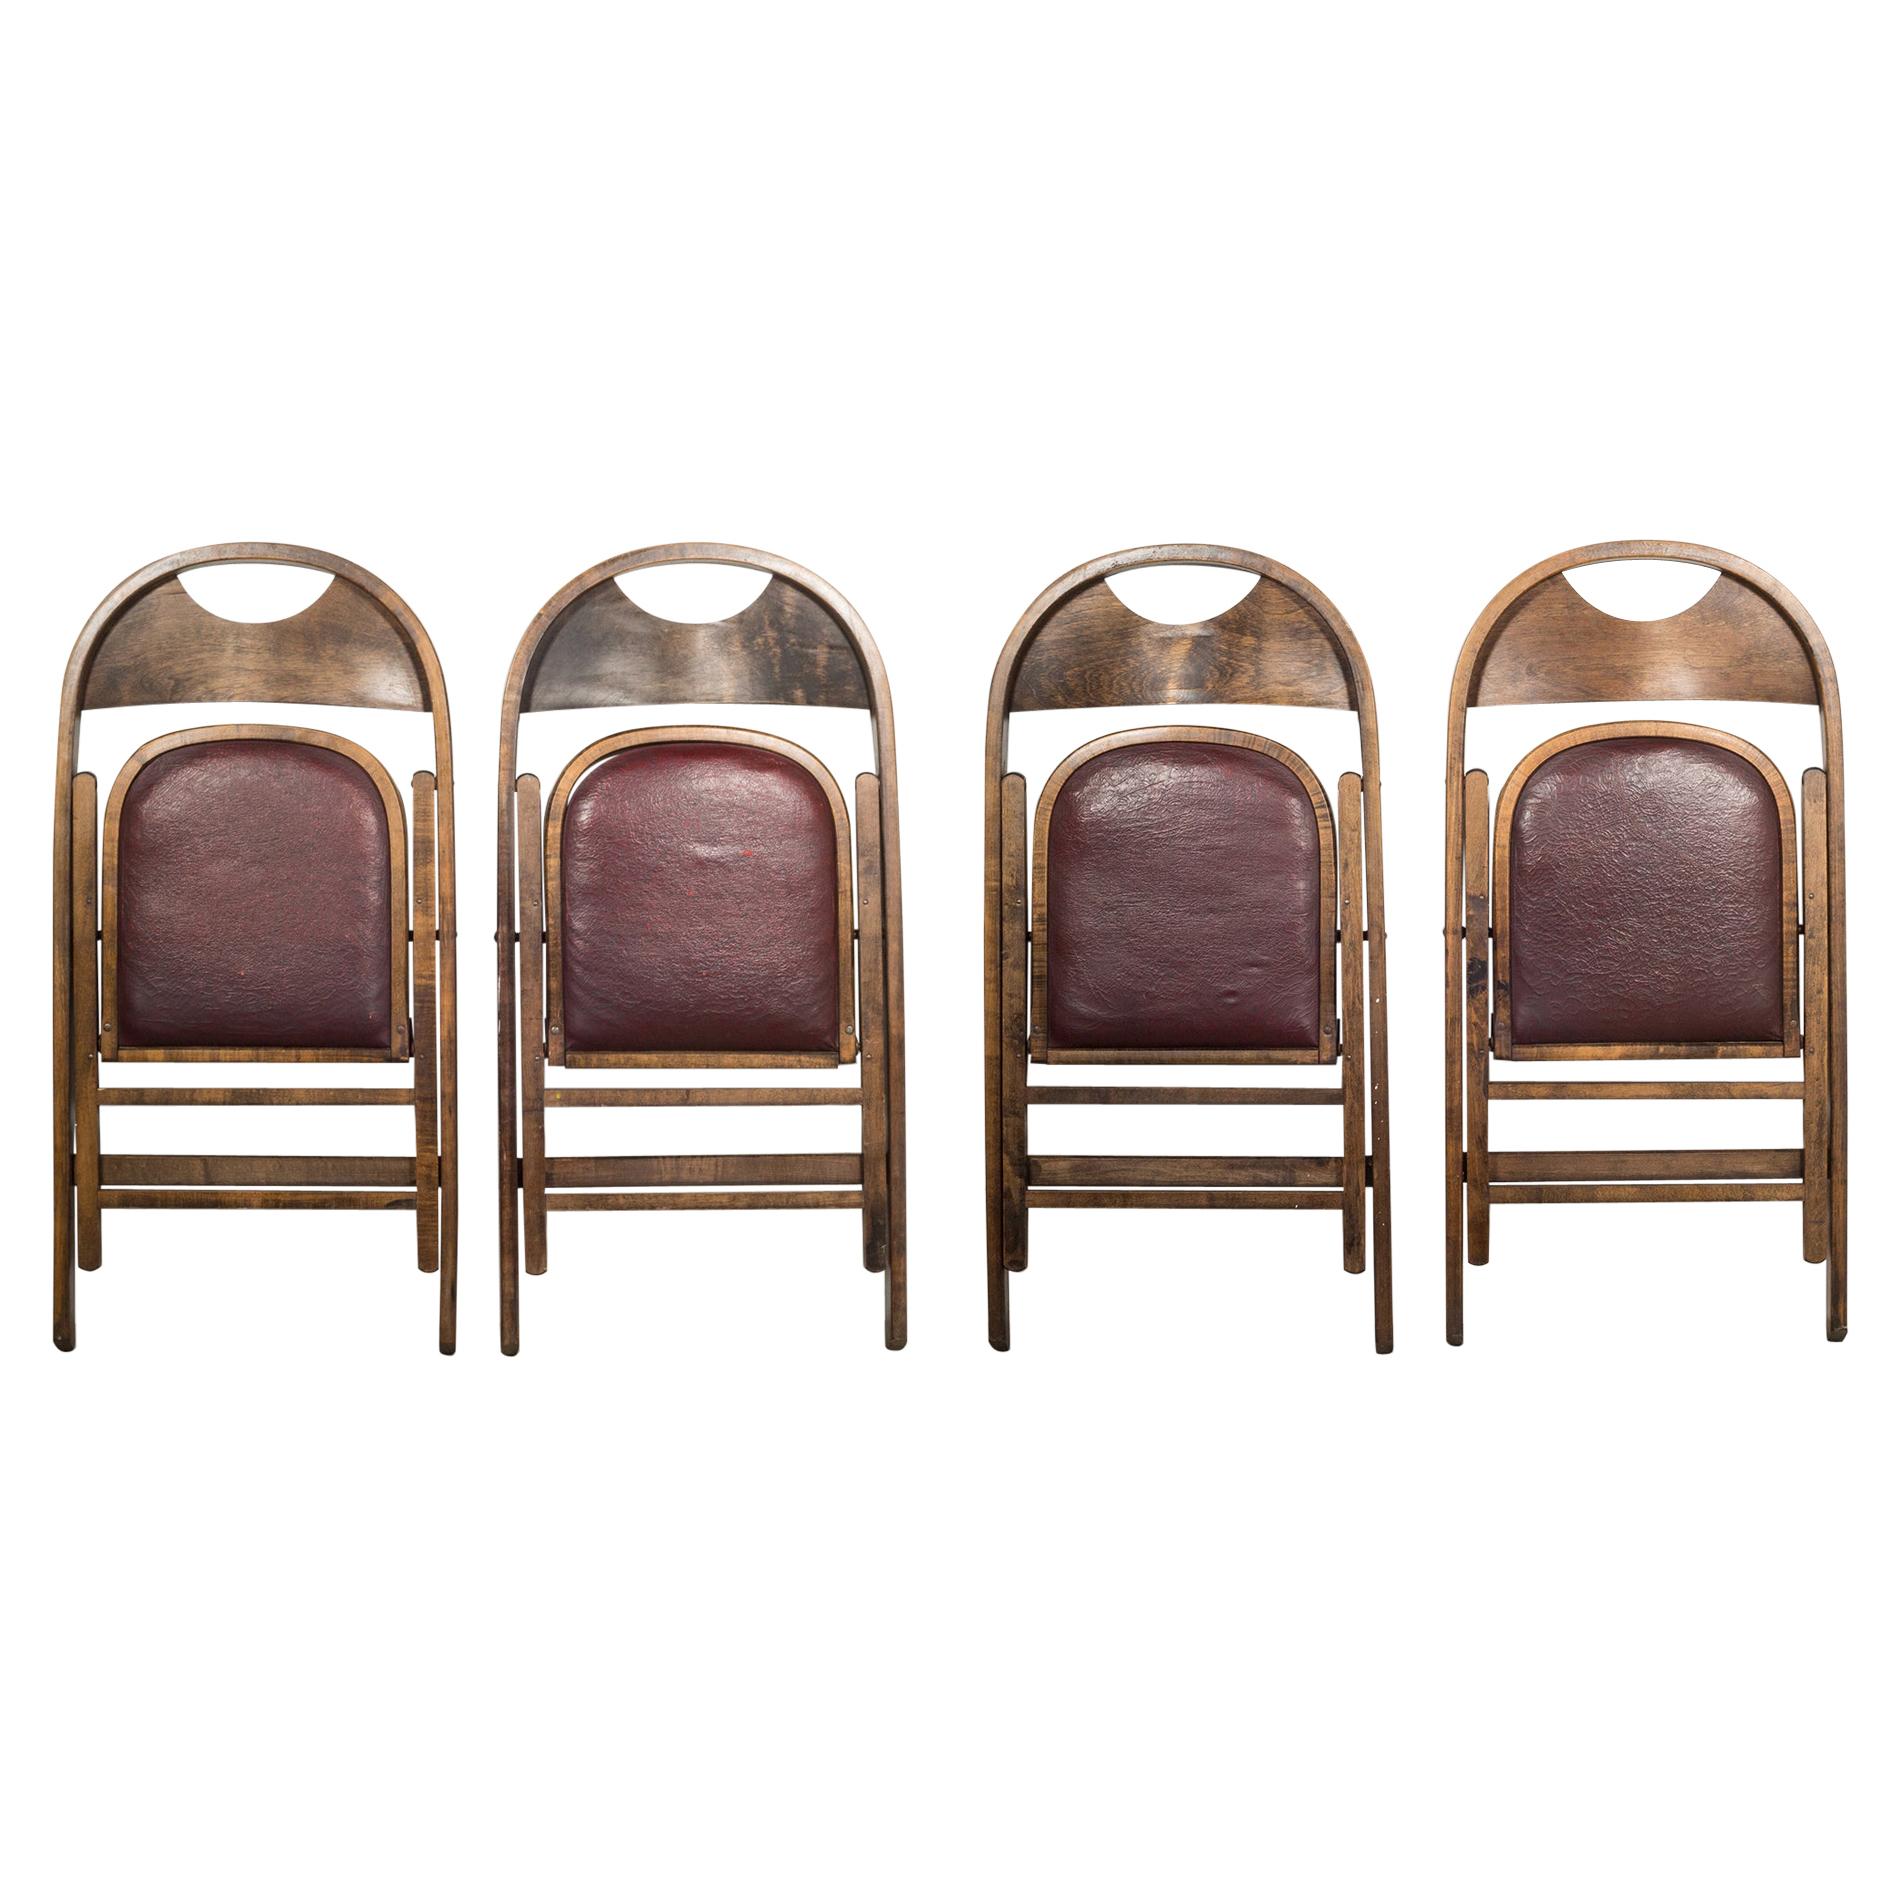 Late 19th C./Early 20th C. Antique Acme Folding Chairs C.1890-1910